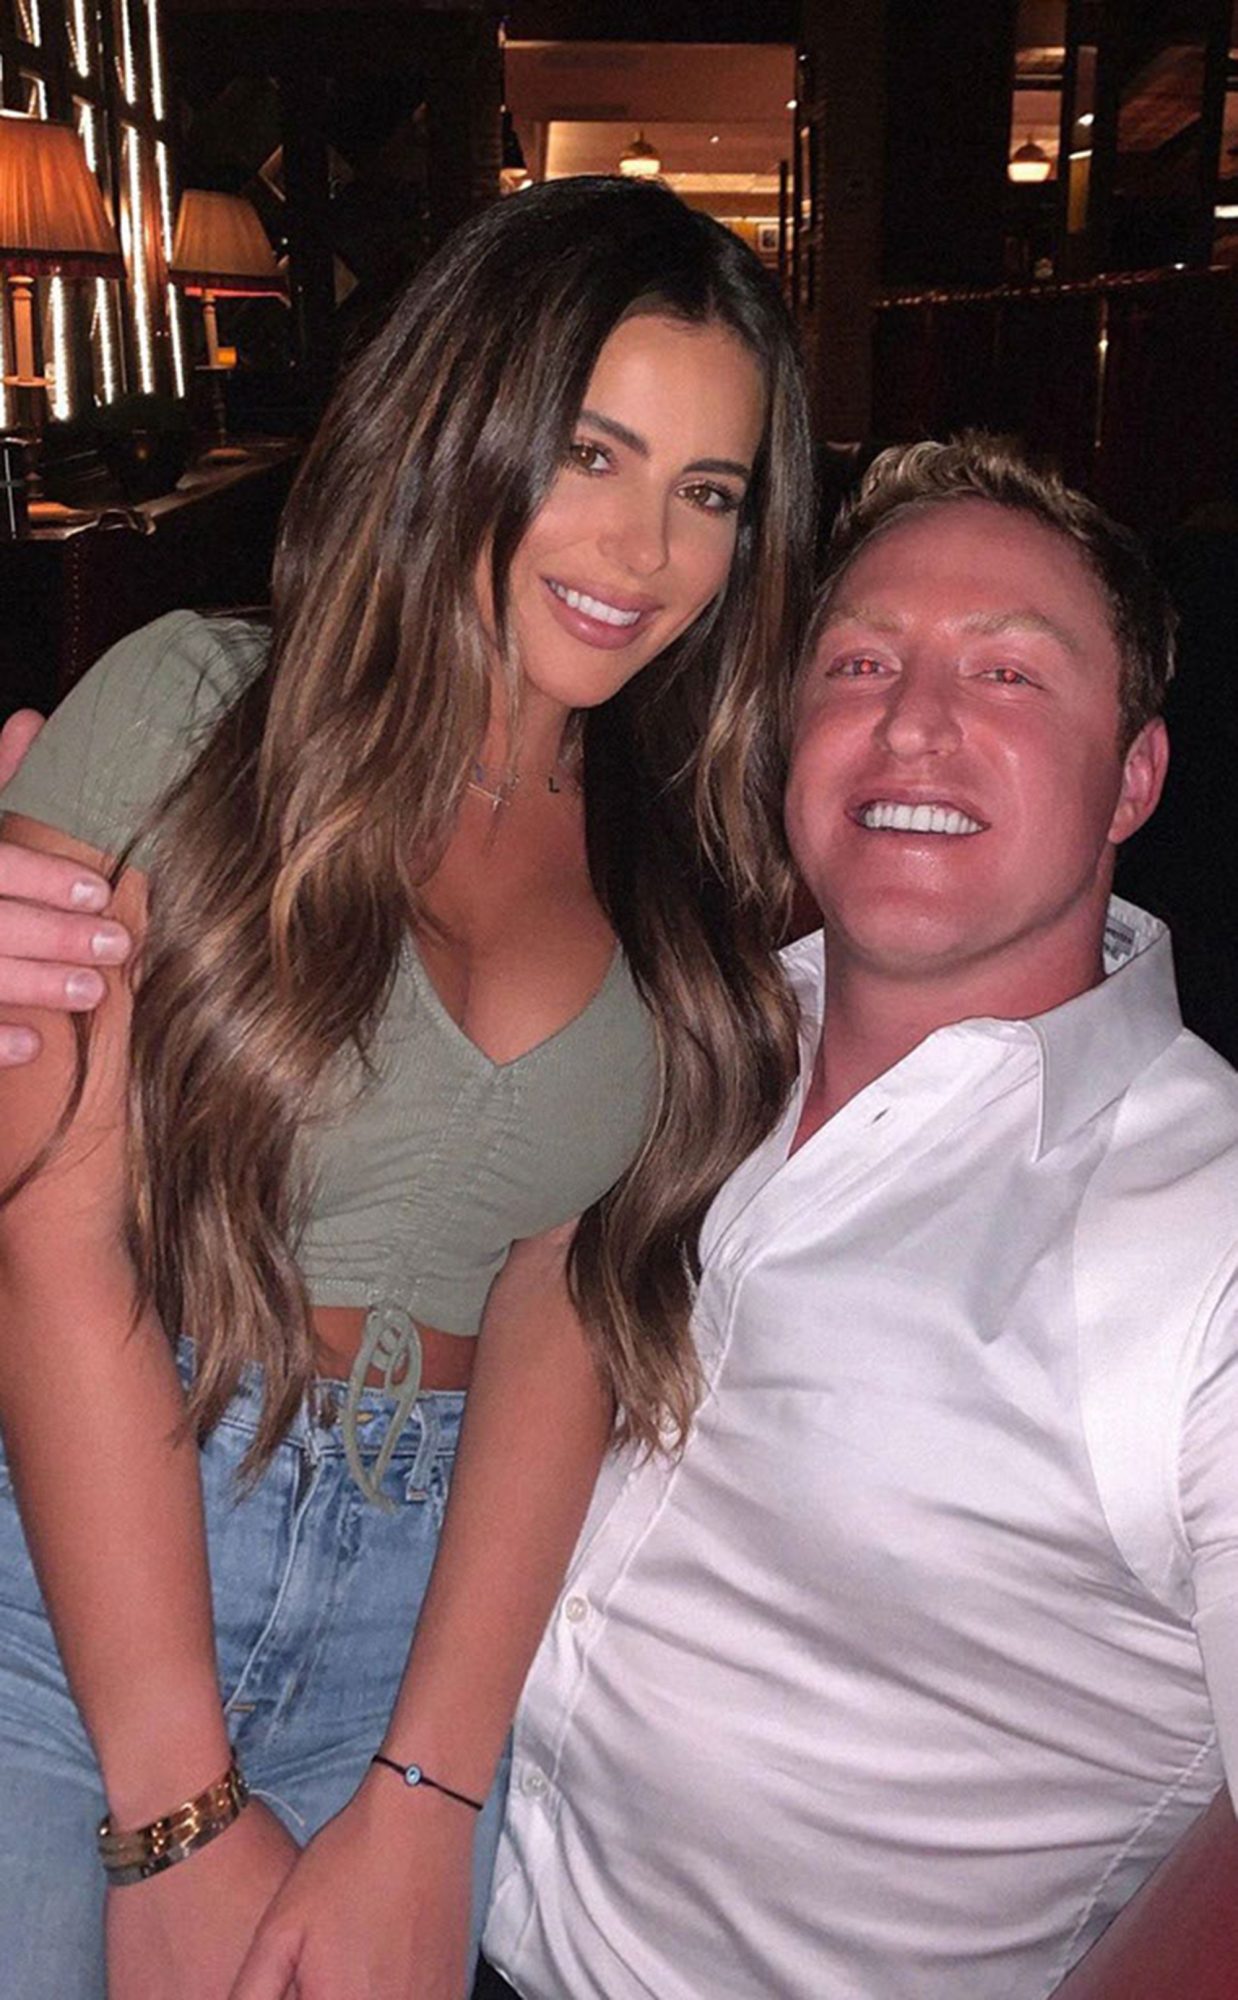 Brielle and her adoptive father Kroy Biermann.